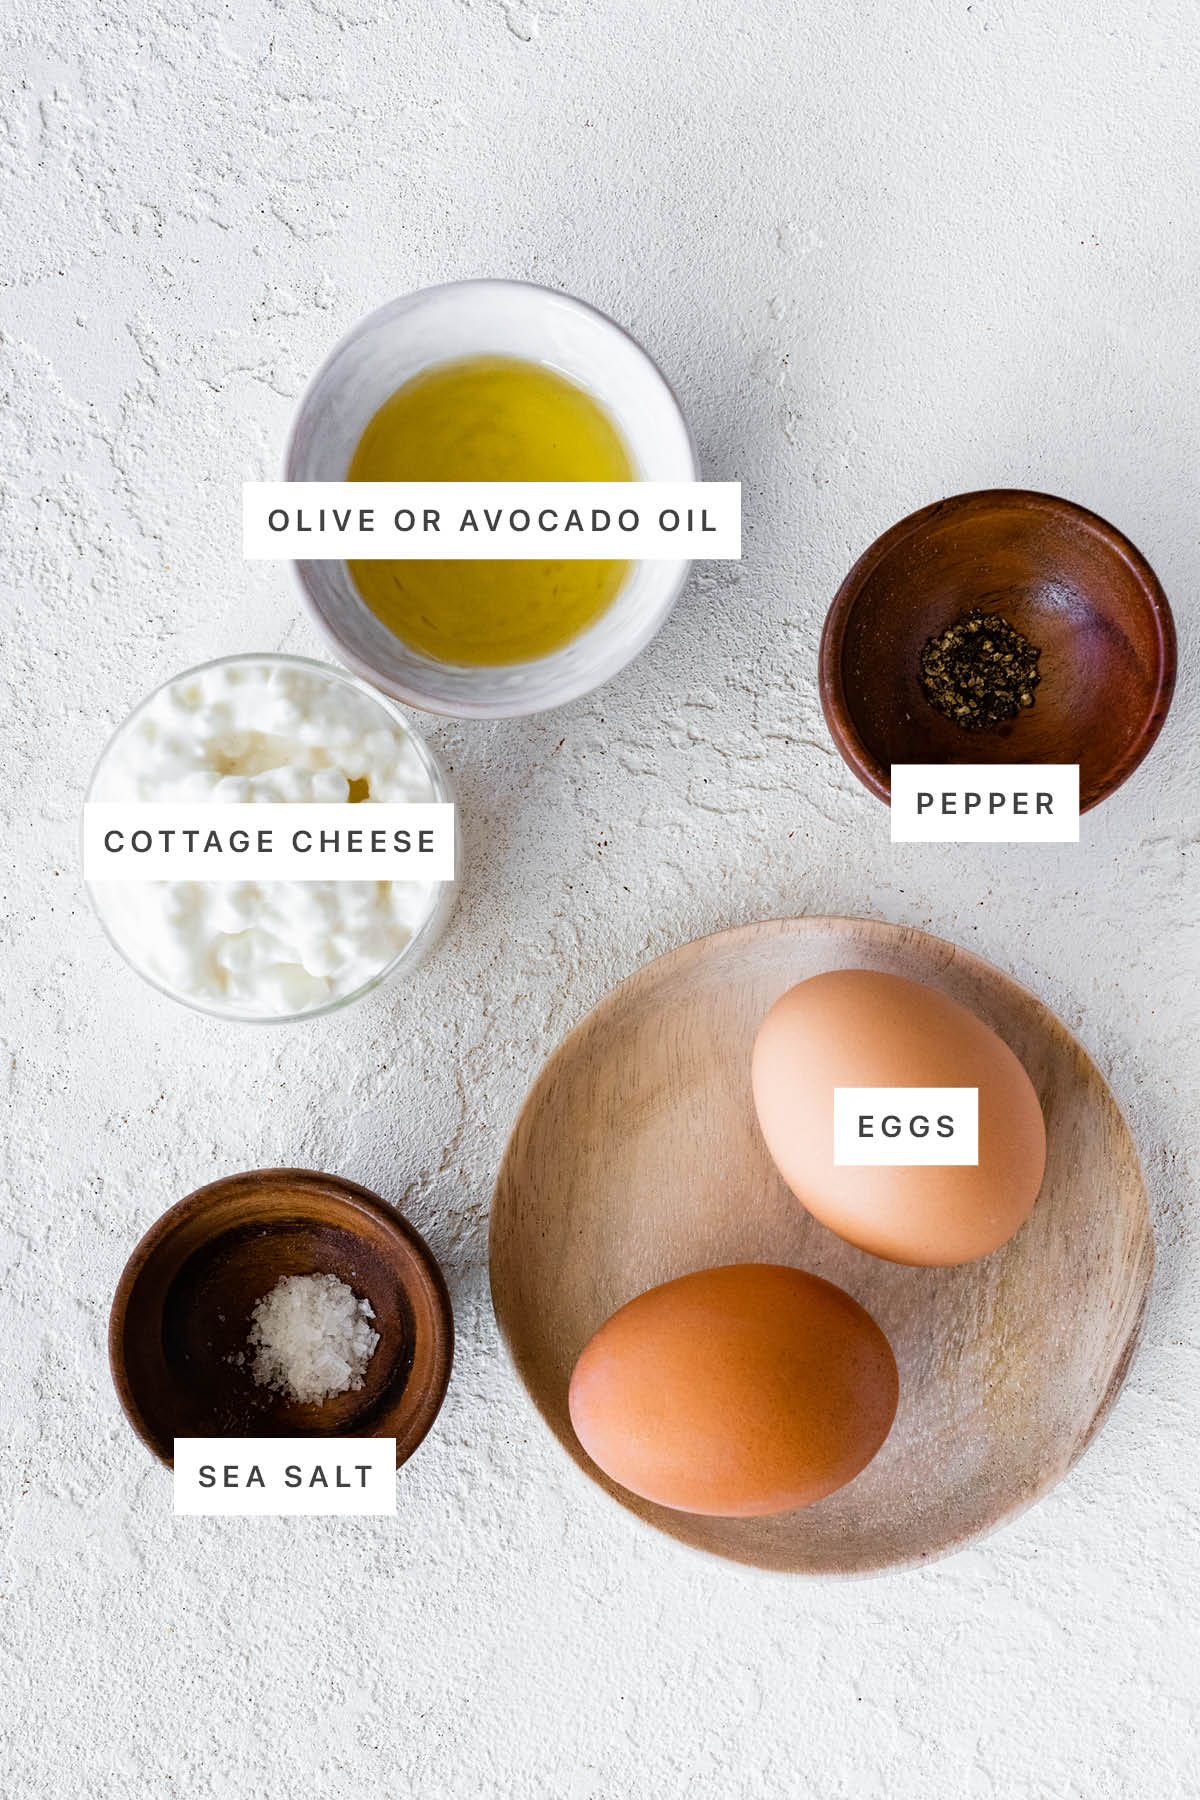 Ingredients measured out to make Cottage Cheese Eggs: olive oil, salt, pepper, cottage cheese and eggs.